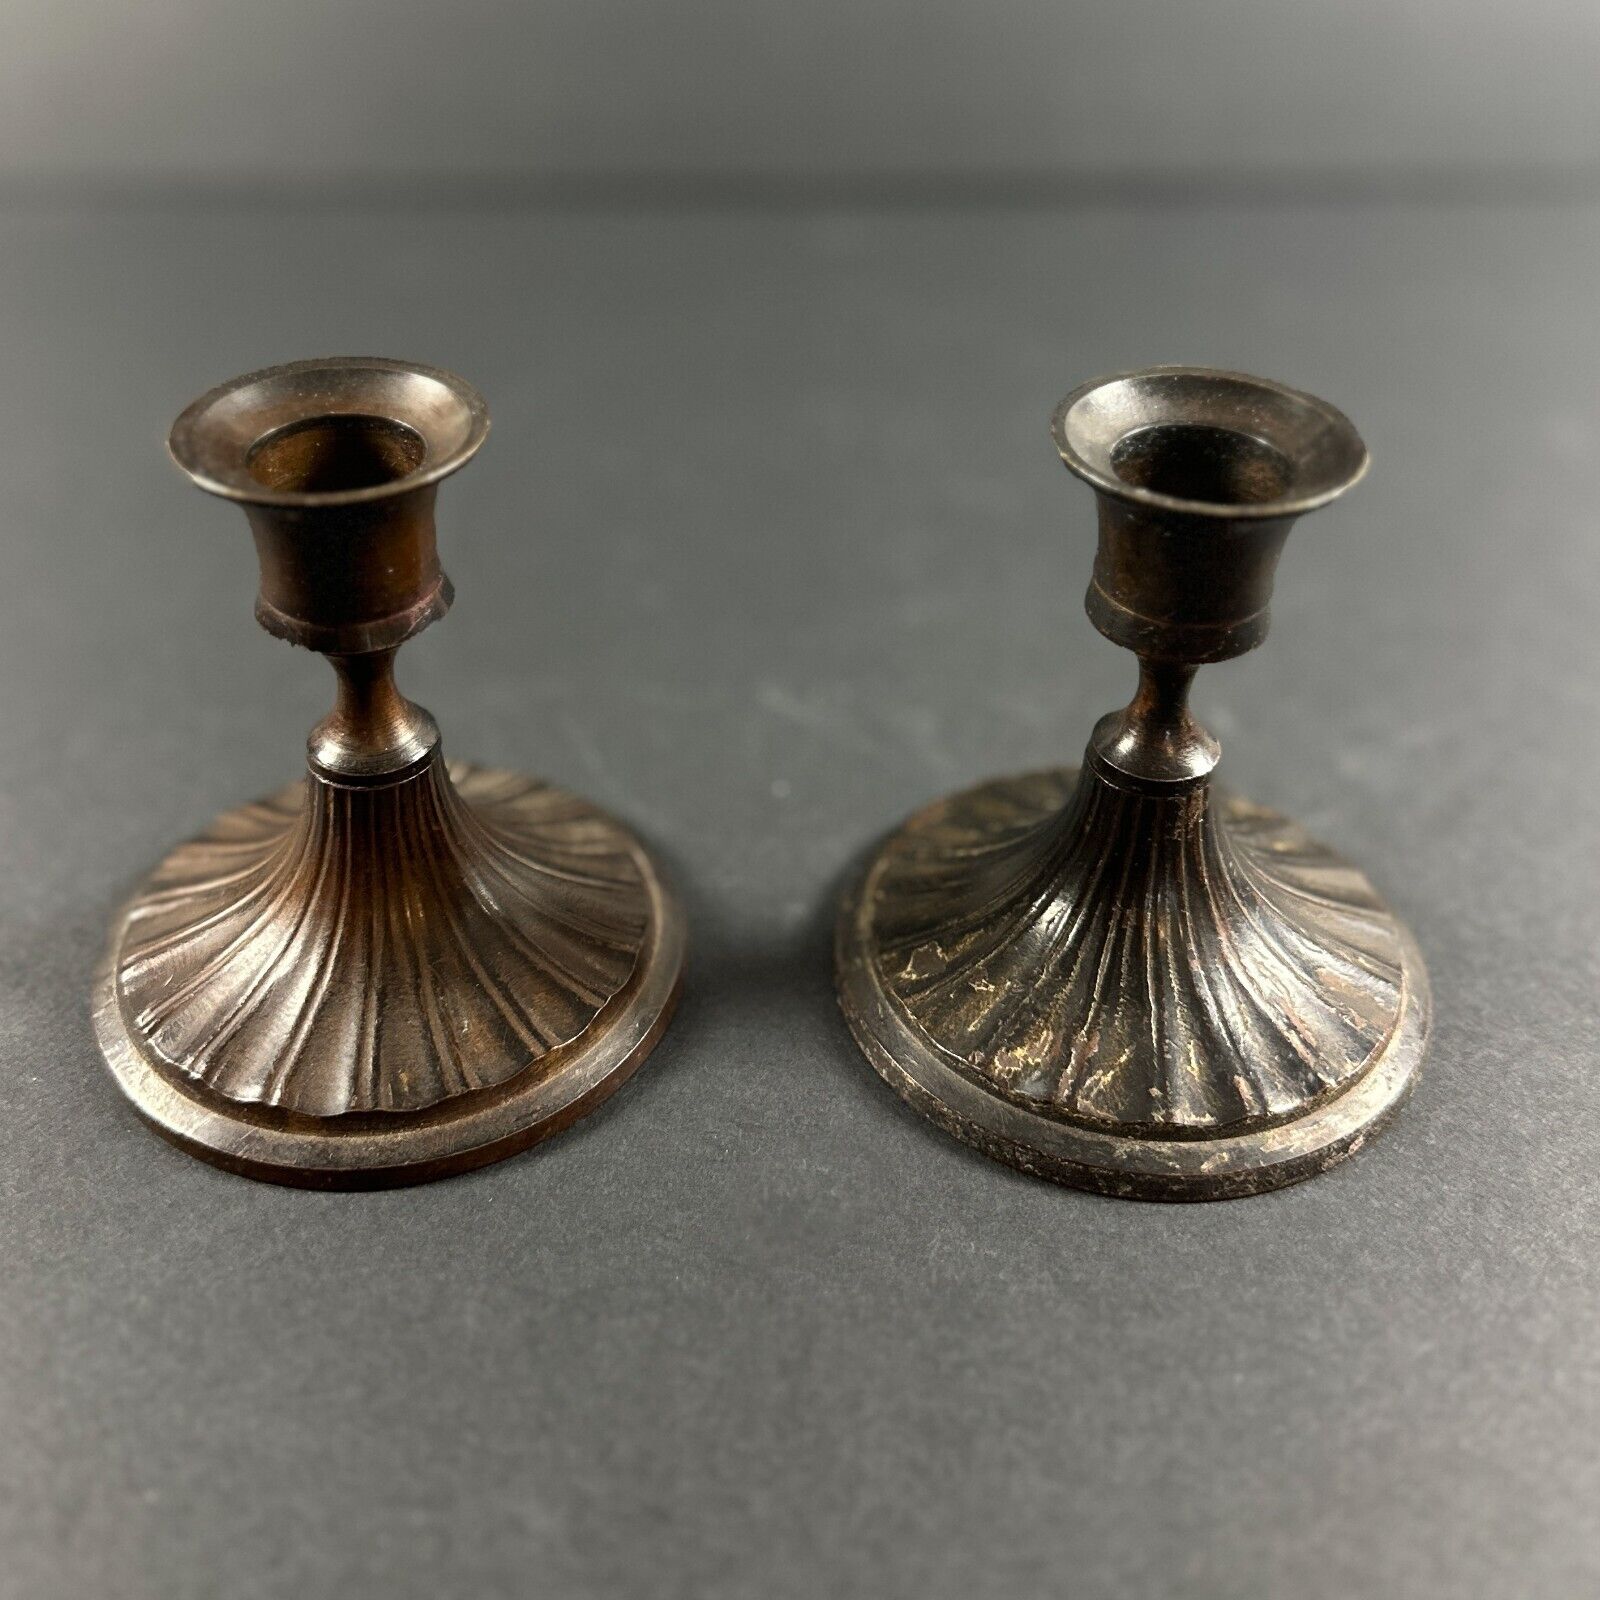 Bronze Candlesticks, set of 2, 3 inches tall